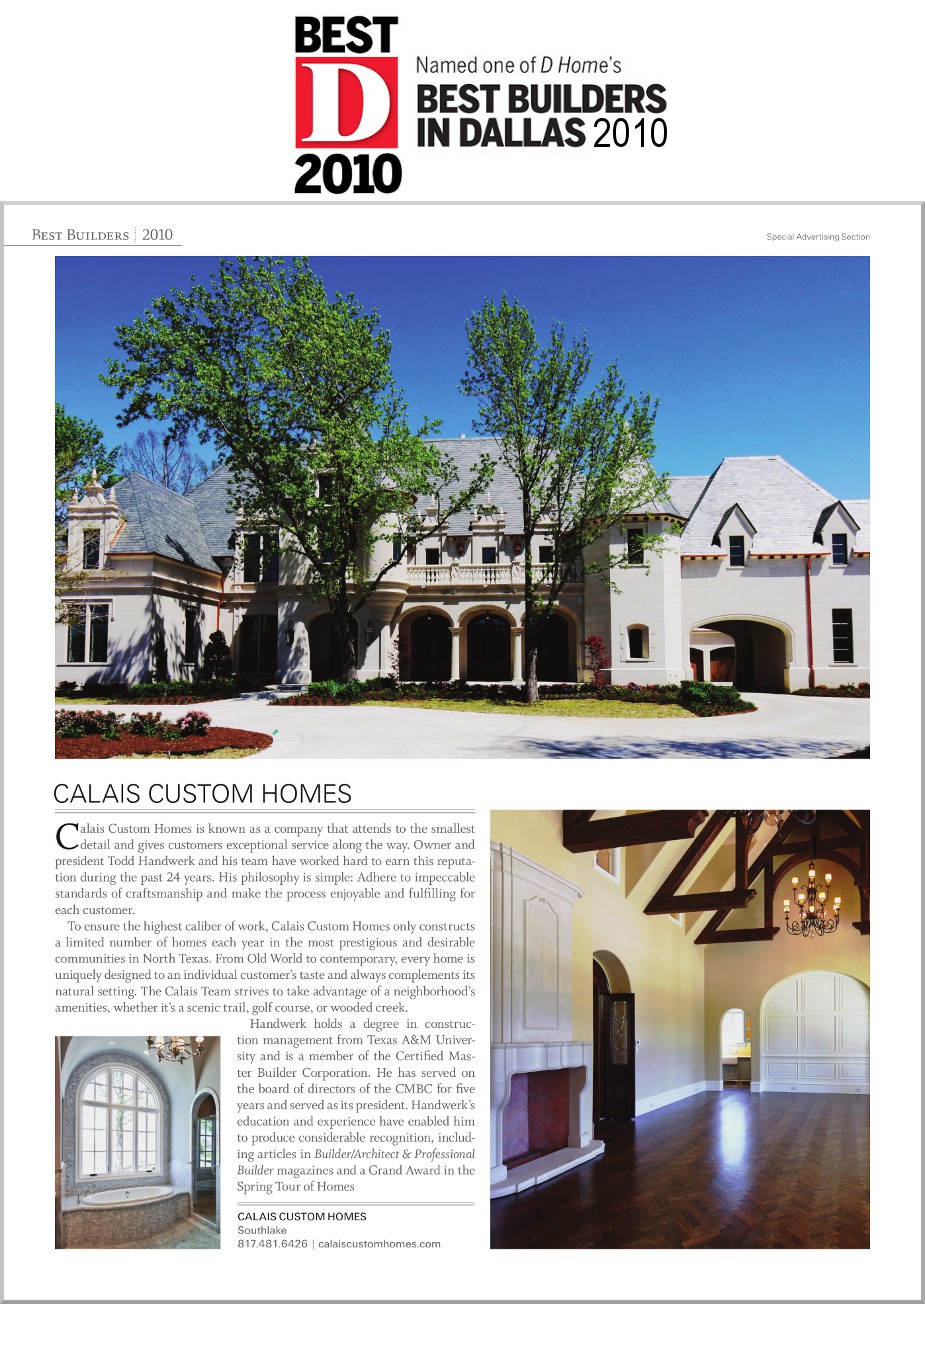 2010 DHome Best Builder Award Article